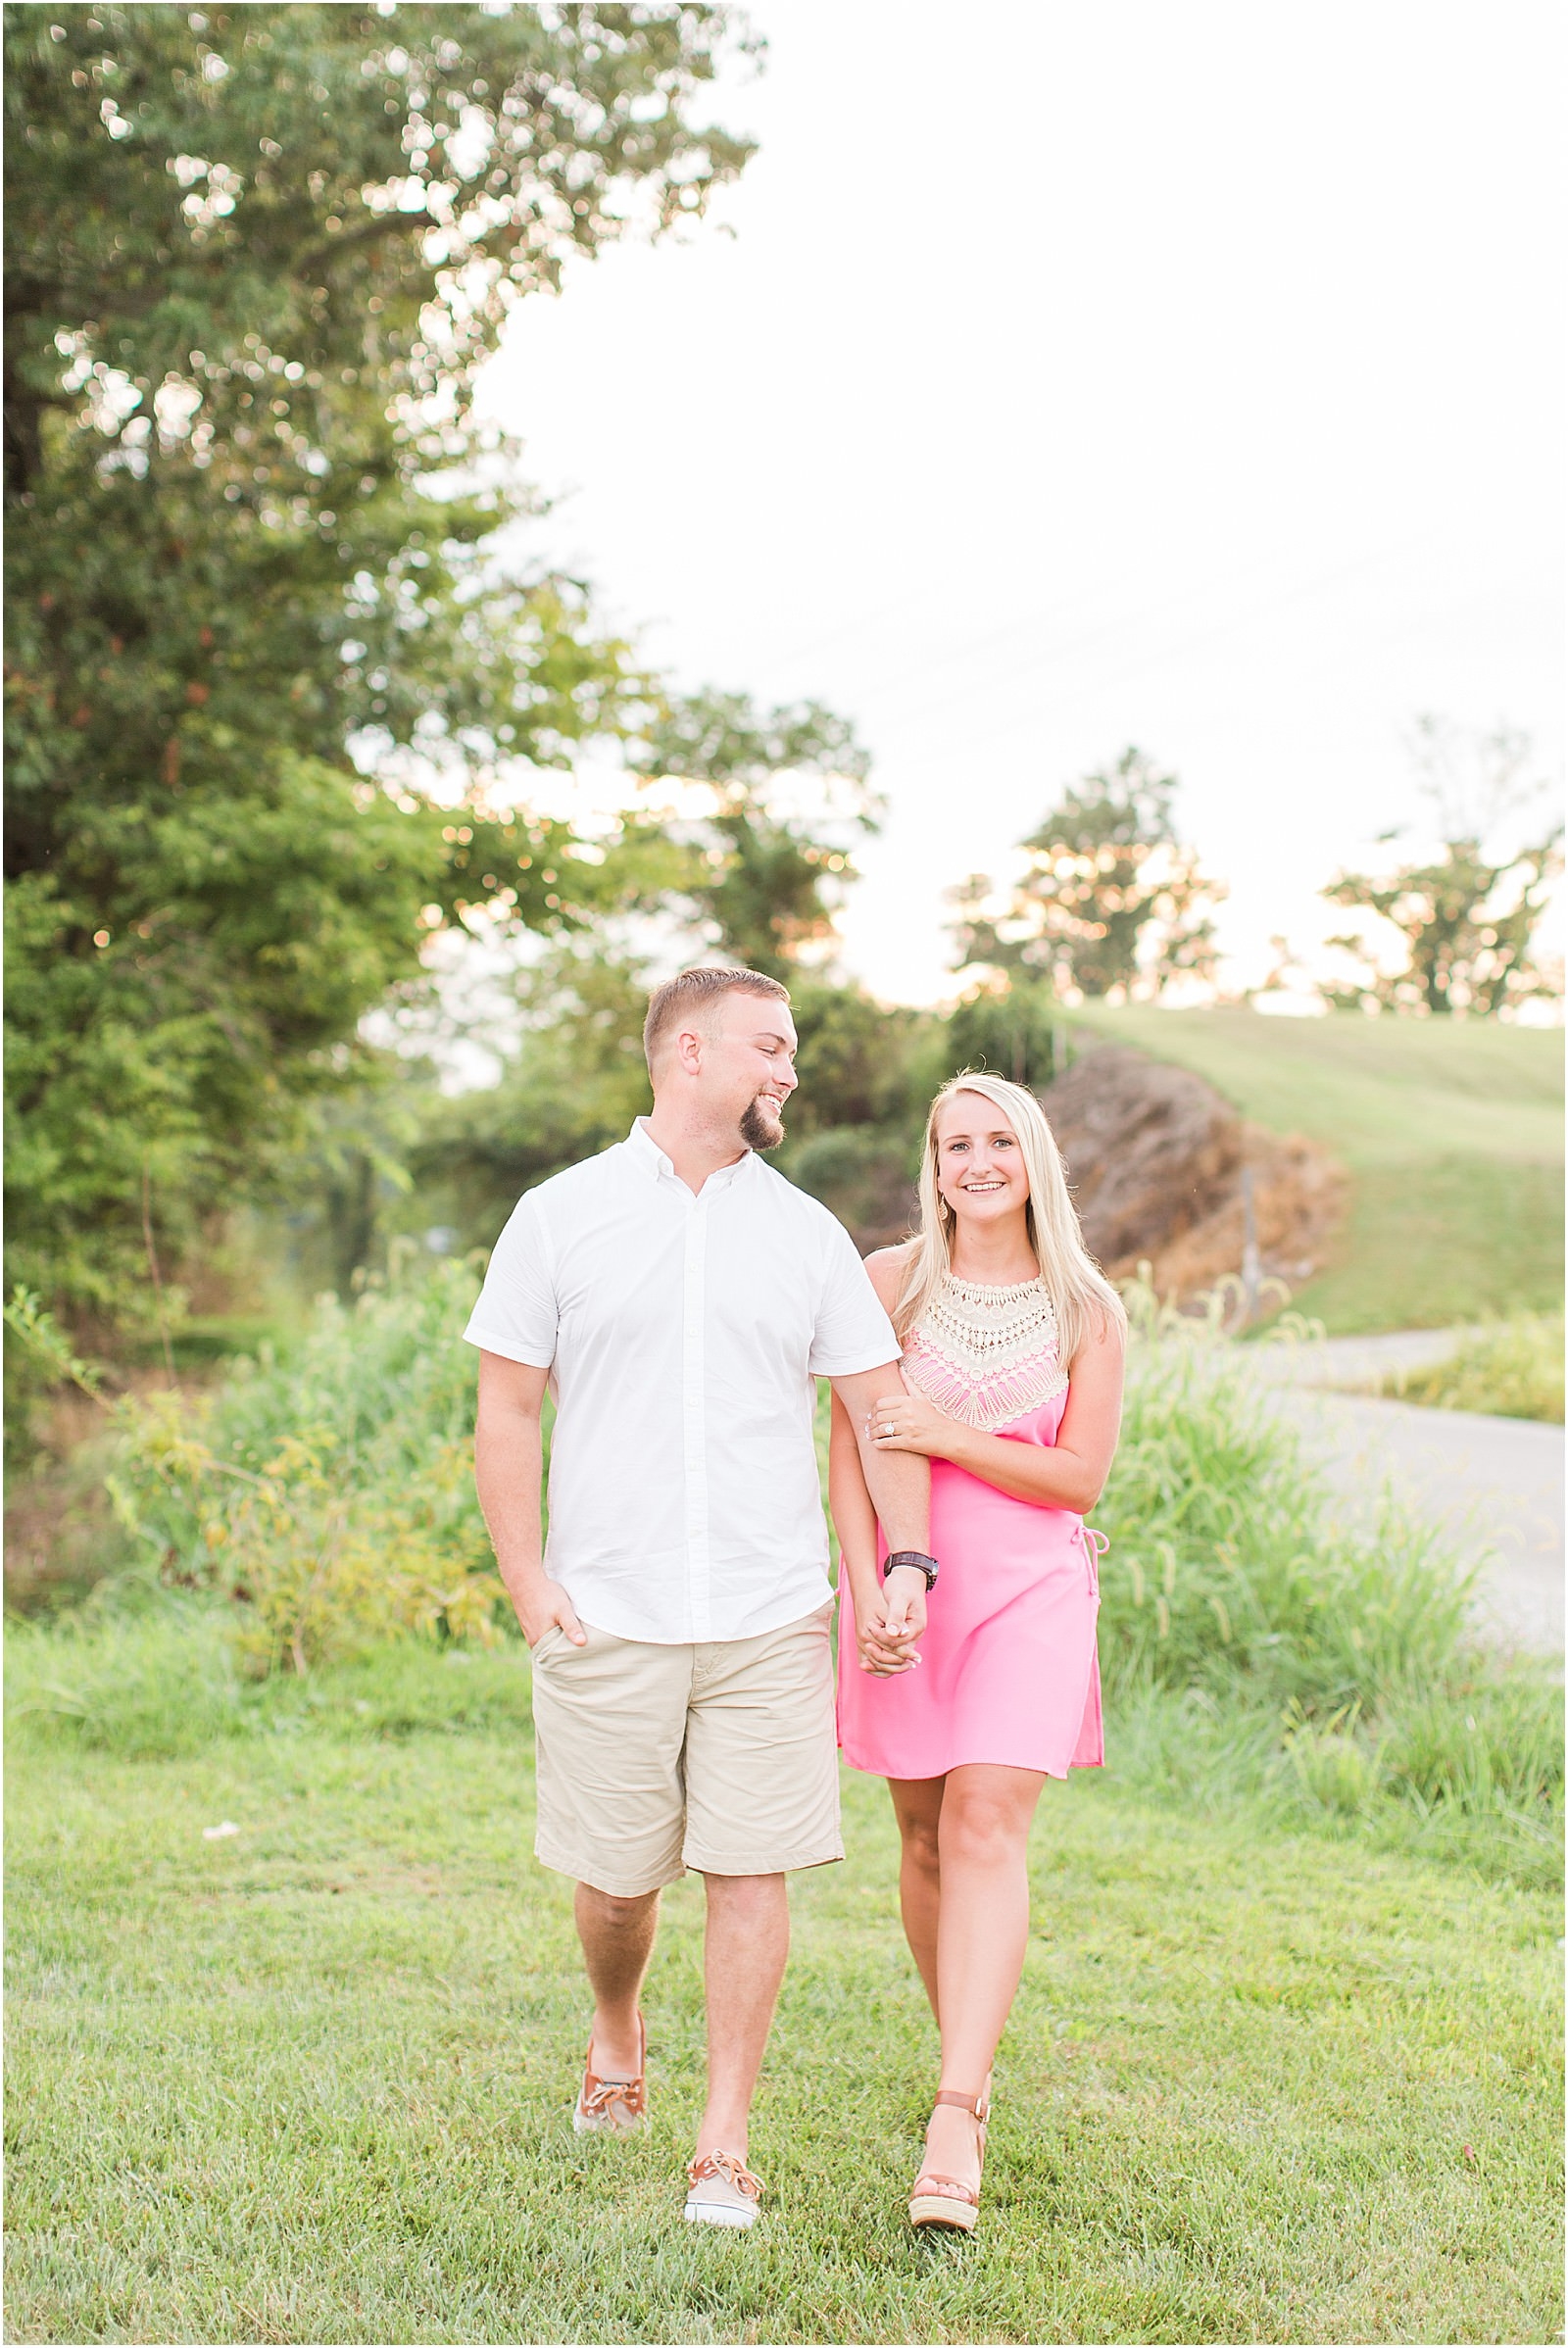 Lauren and Bryce | The Corner House B&ed and Breakfast Engagement Session | Bret and Brandie Photography 012.jpg